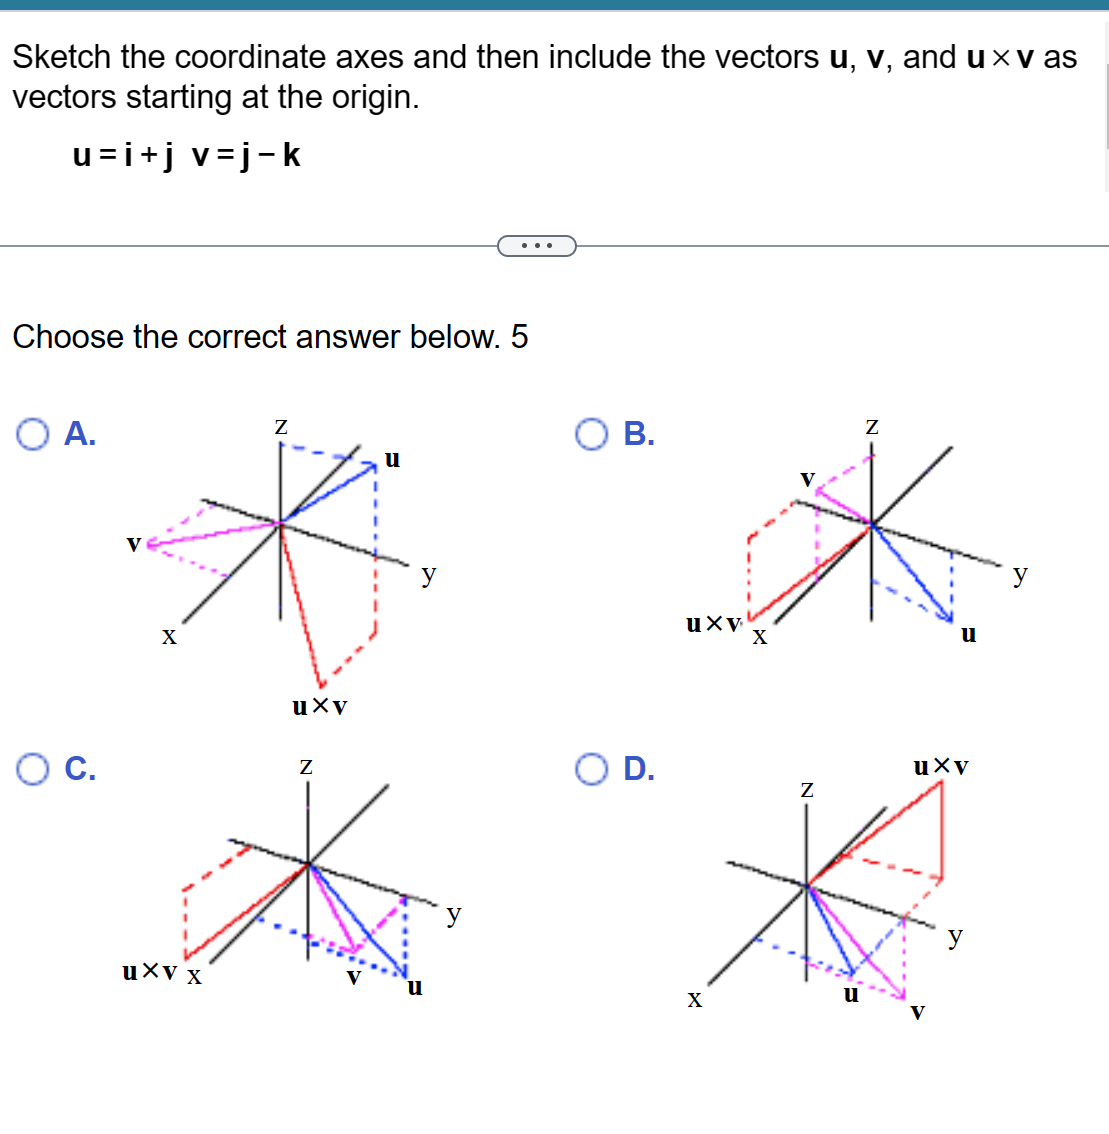 Sketch the coordinate axes and then include the vectors u, v, and u× v as
vectors starting at the origin.
u=i+j v=j-k
Choose the correct answer below. 5
O A.
C.
X
uxv x
Z
uxv
Z
u
y
u
B.
O D.
uxv
X
X
Z
Z
uxv